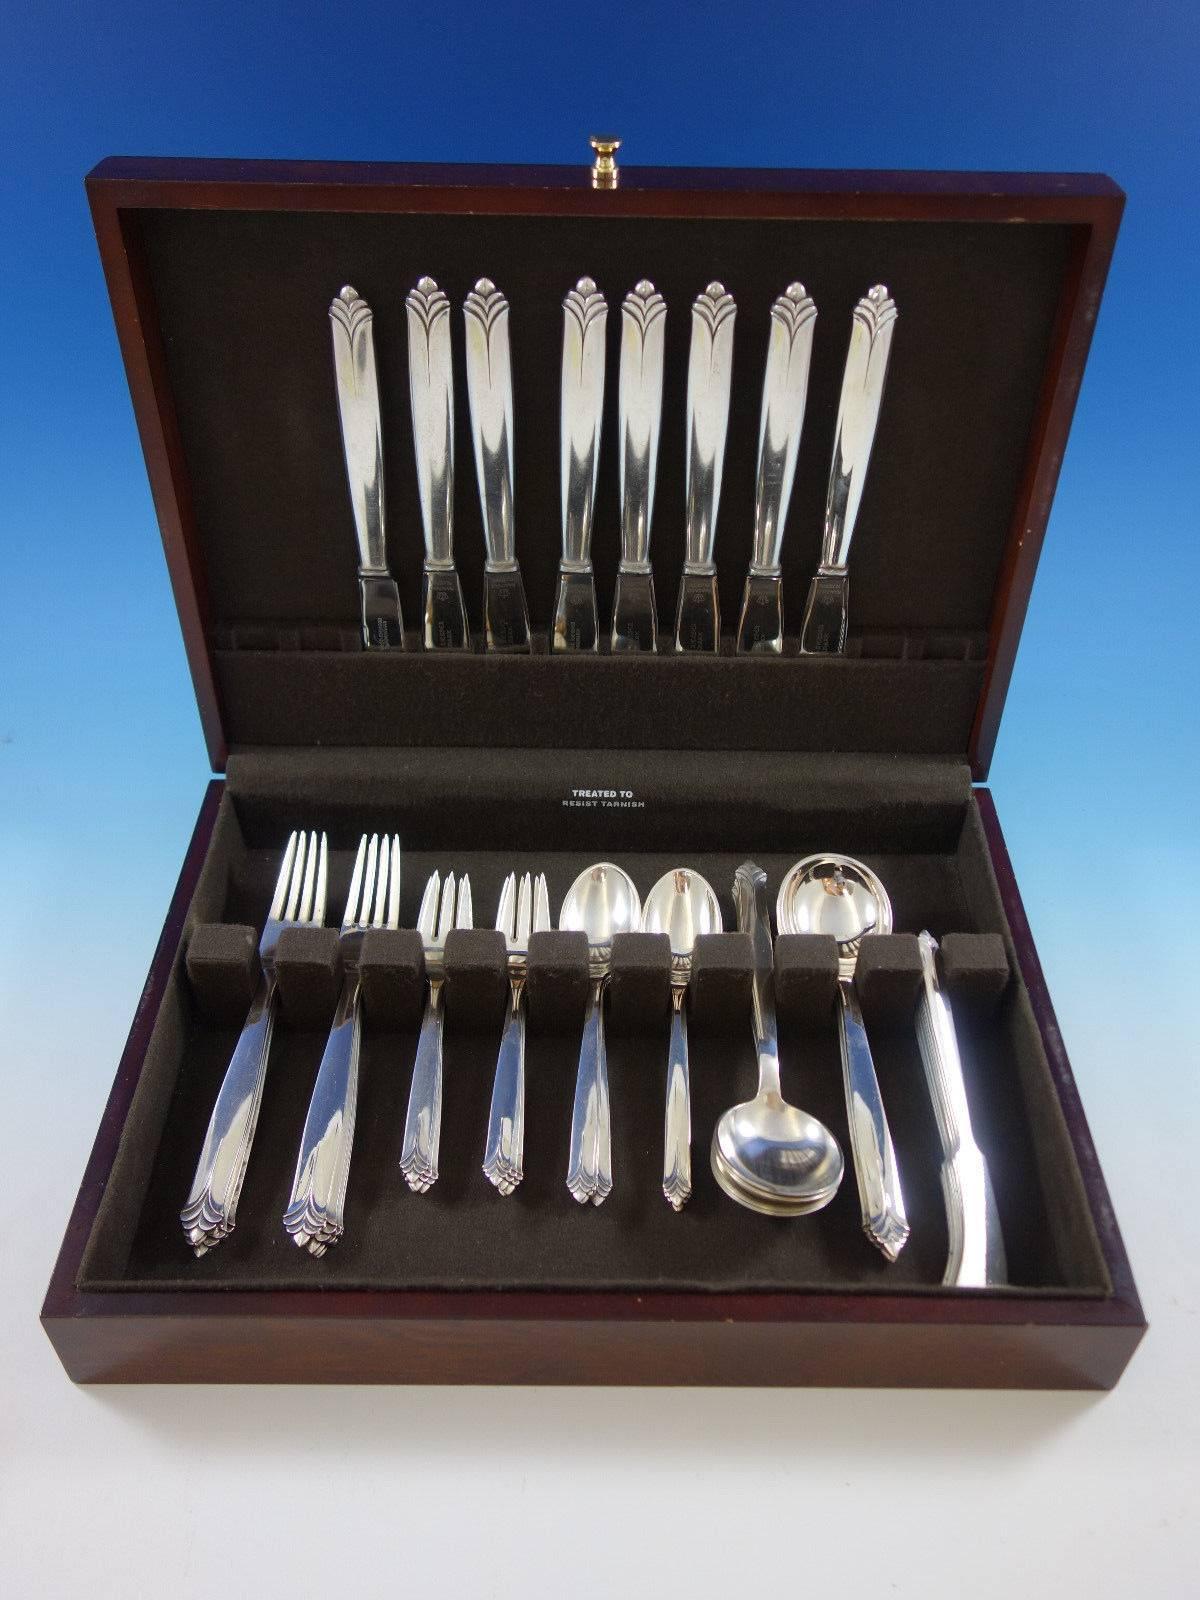 Rare tropic AKA #37 by Evald Nielsen Danish sterling silver art deco flatware set - 48 pieces. This pattern was designed by Evald Nielsen's oldest son, silversmith Aage Weimar. This set includes: 

eight dinner knives, 7 -8 3/4